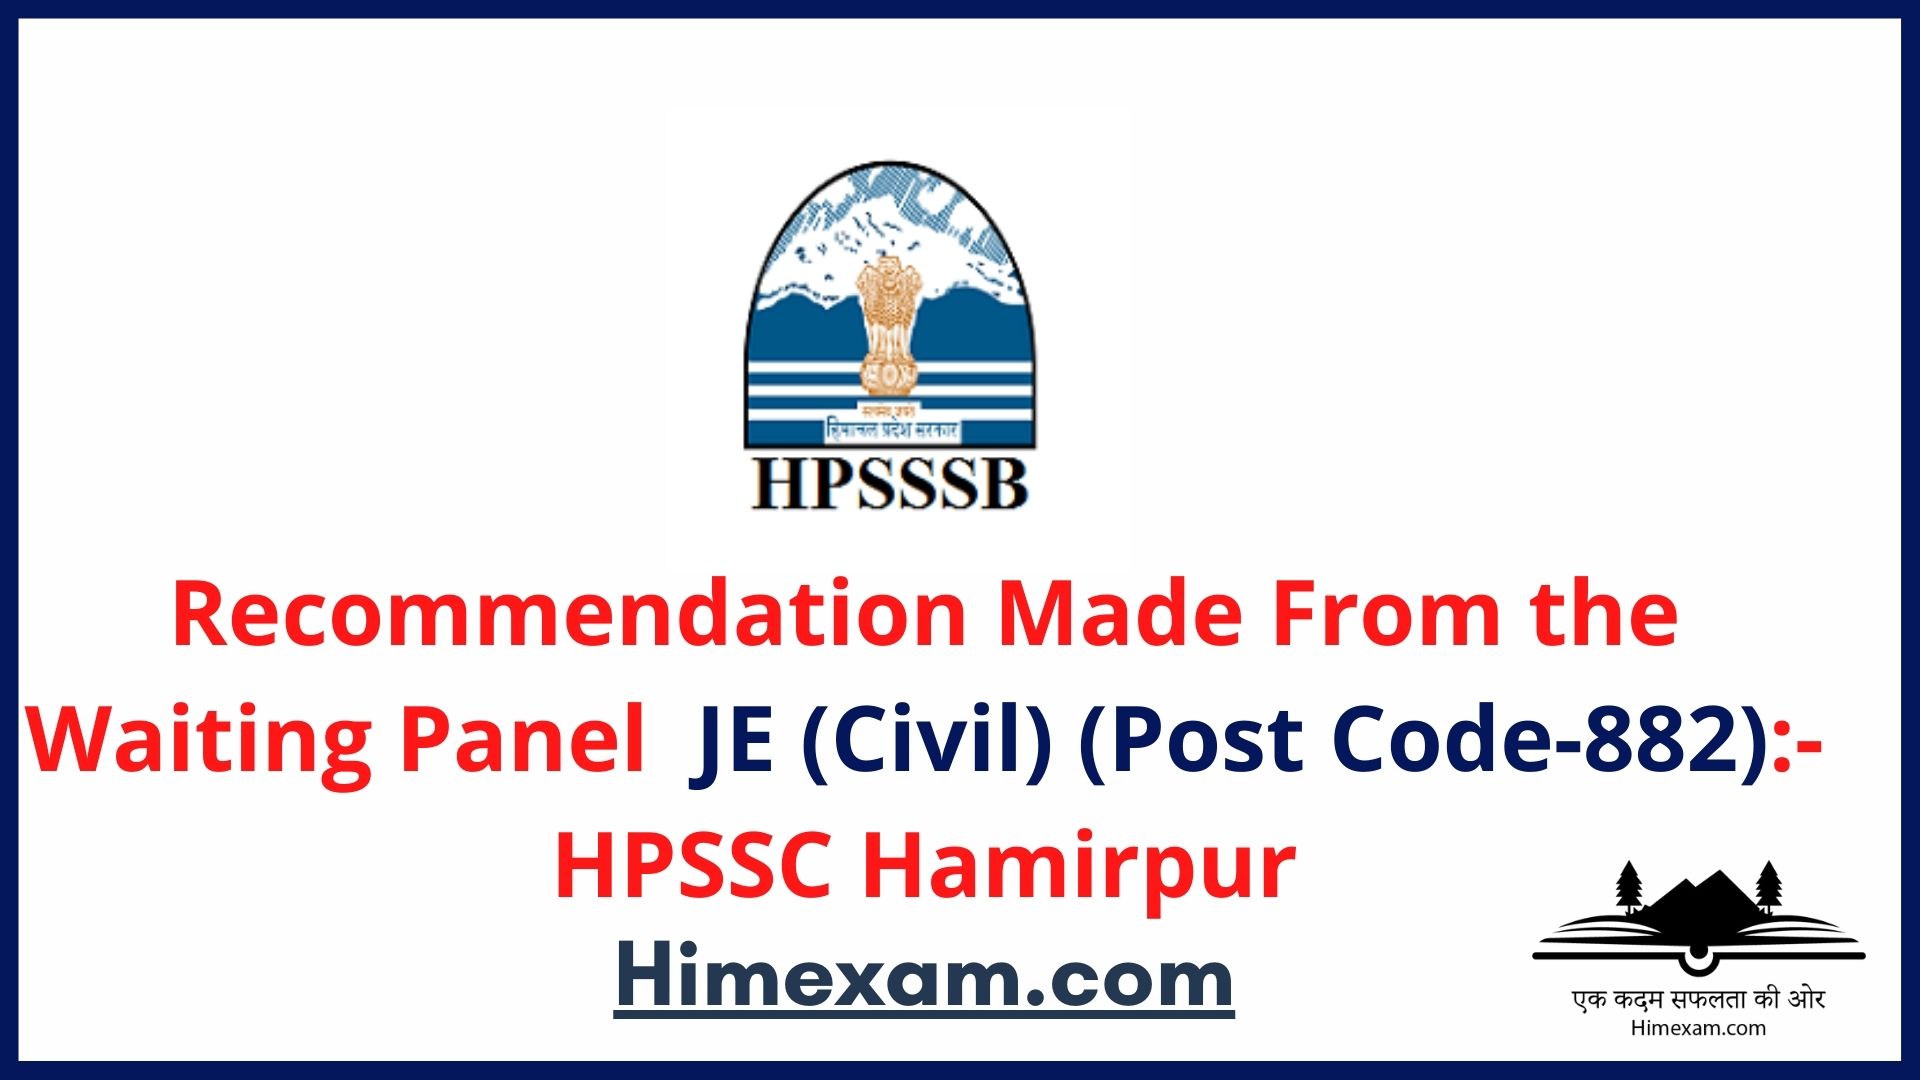 Recommendation Made From the Waiting Panel  JE (Civil) (Post Code-882):- HPSSC Hamirpur